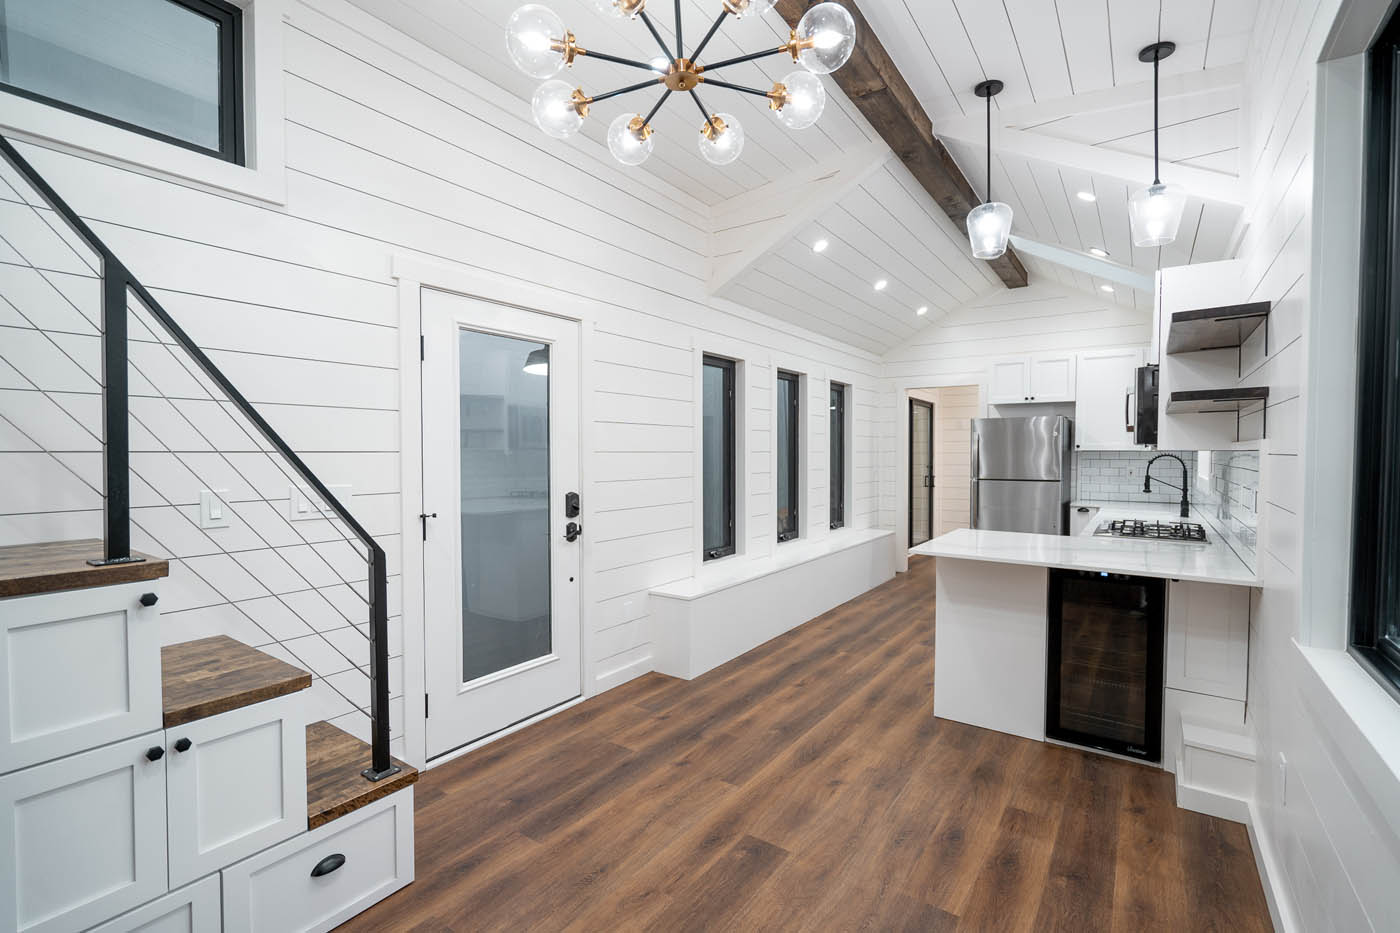 A modern home with dark floors and white kitchen cabinets, provided by one of the best Bend / Redmond tiny house companies.